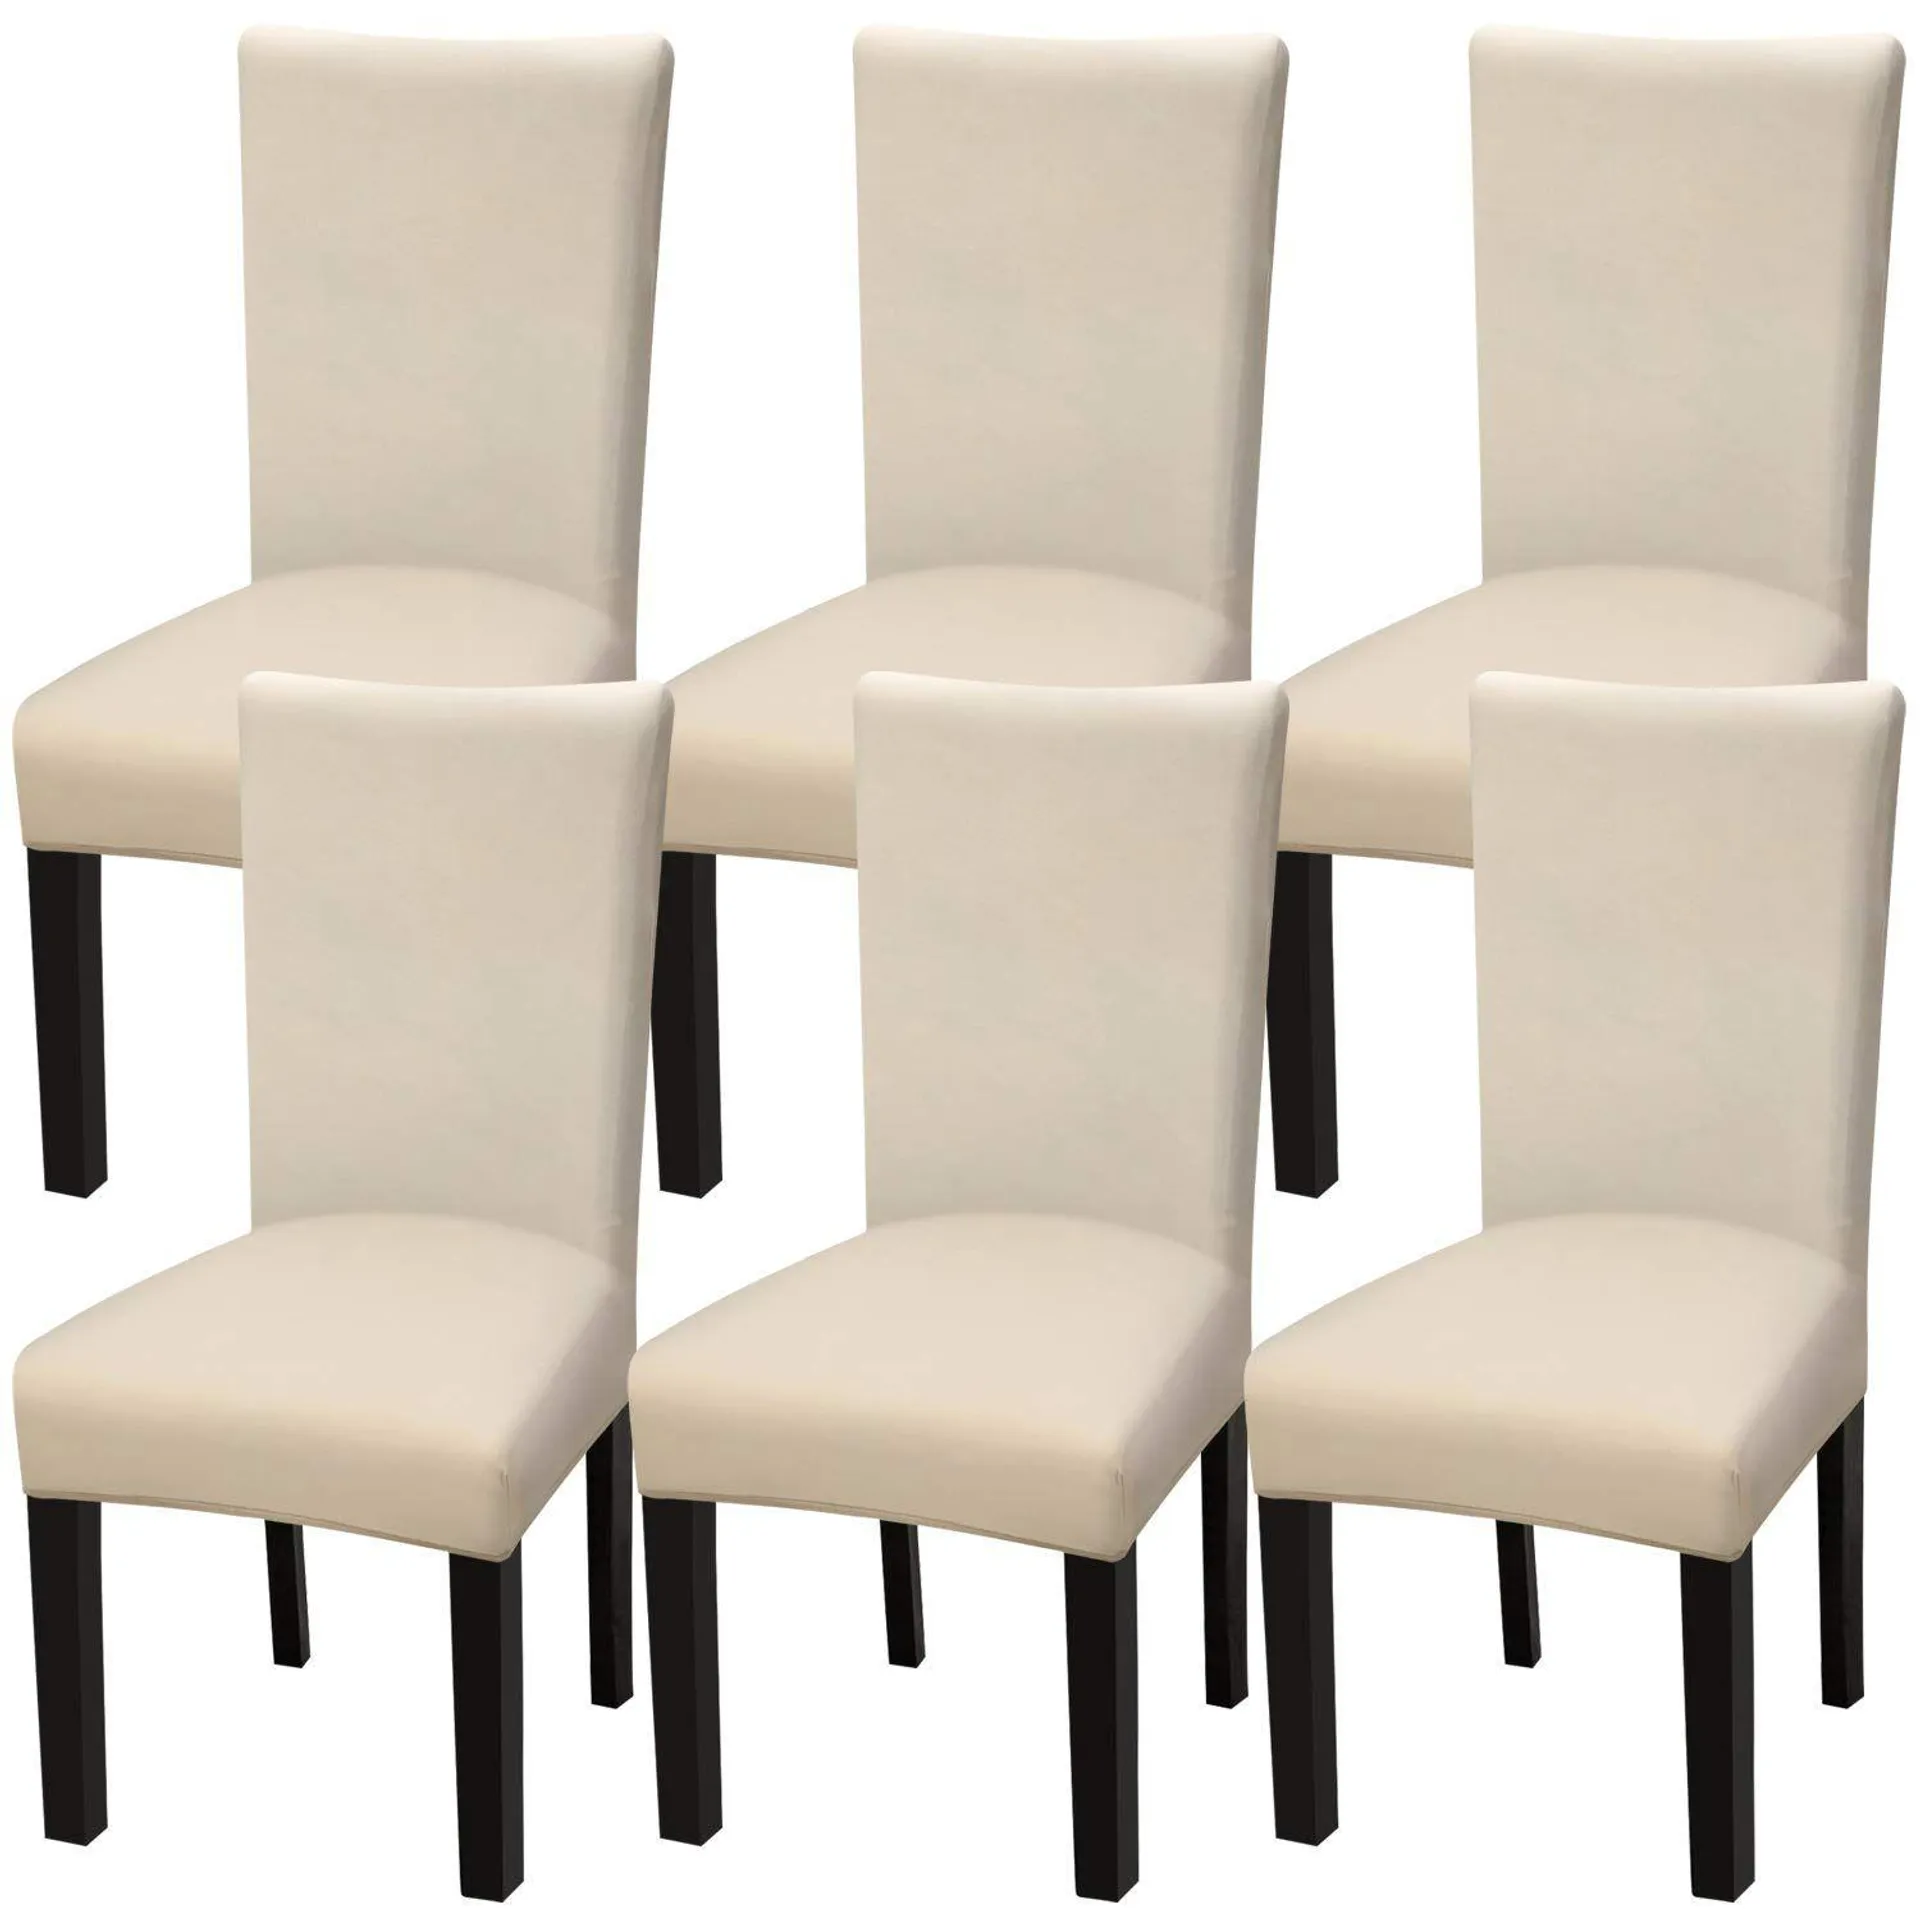 Washable Dining Chair Covers Set of 6 - Beige Elasticated Smooth Removable